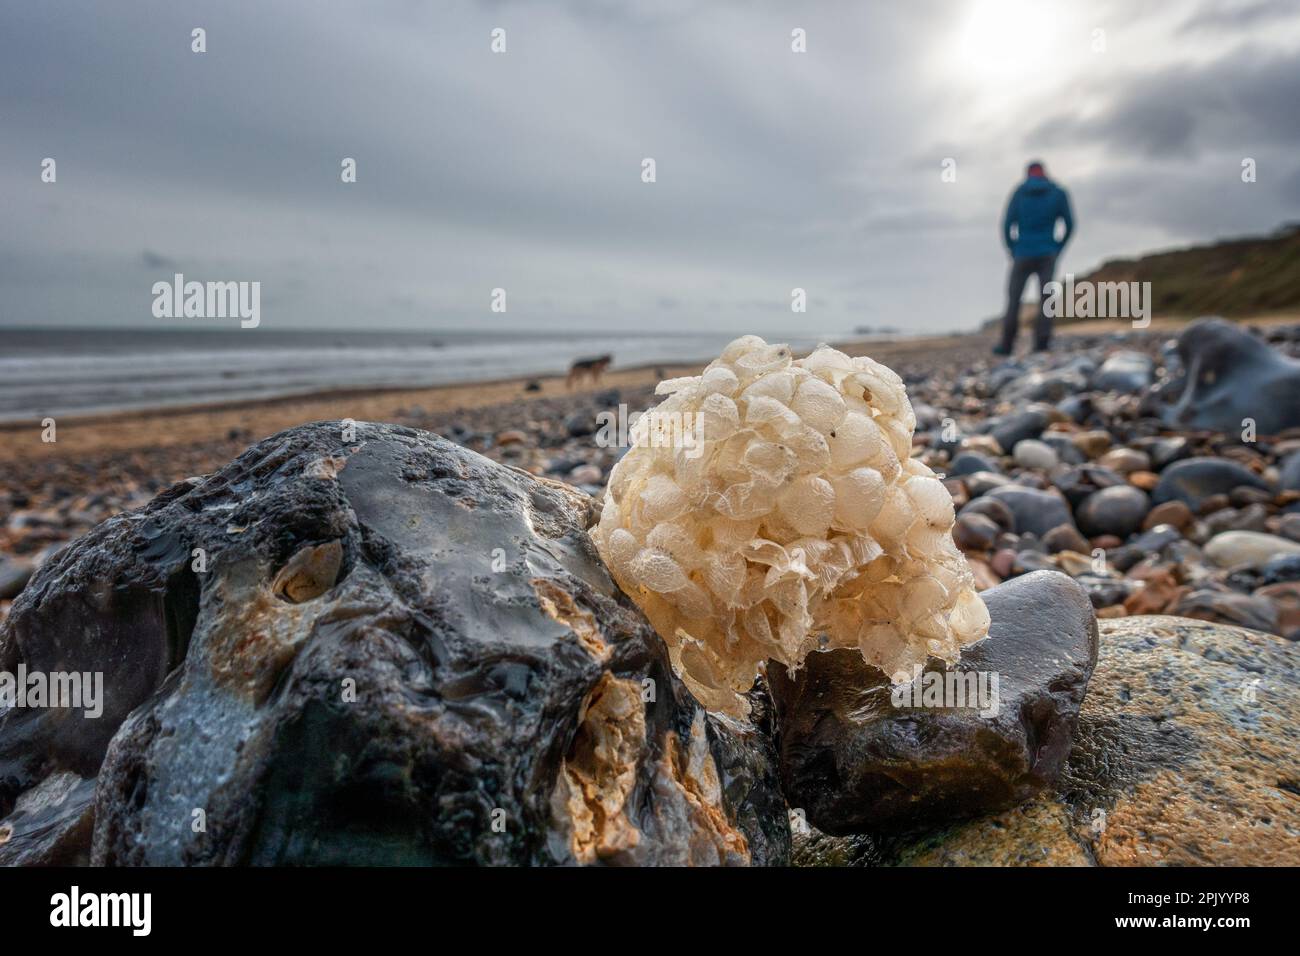 Person fossil hunting on East Runton Beach after finding egg cases of the Common Whelk washed up on shore as ball-like clusters, Norfolk, UK Stock Photo